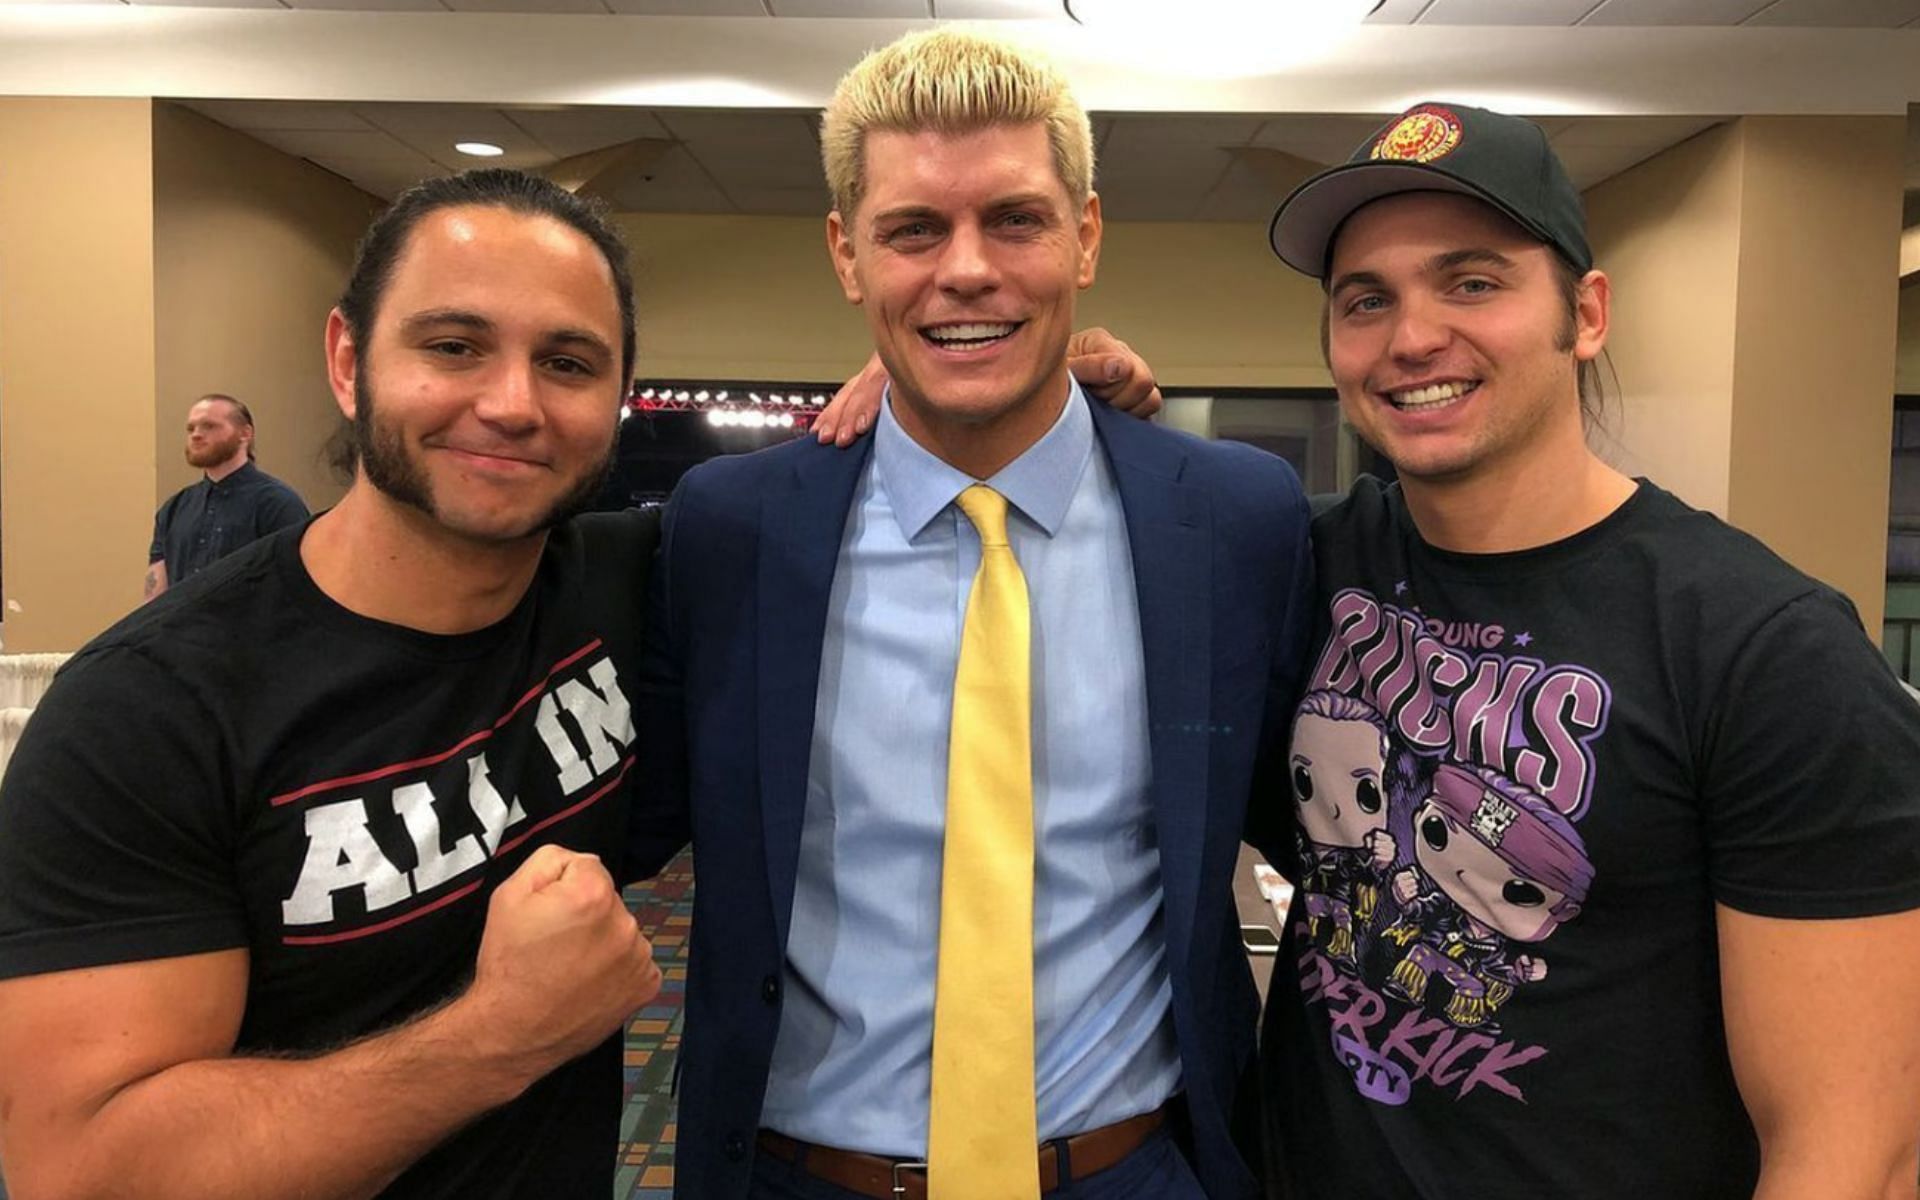 Cody Rhodes was one of the EVPs for AEW